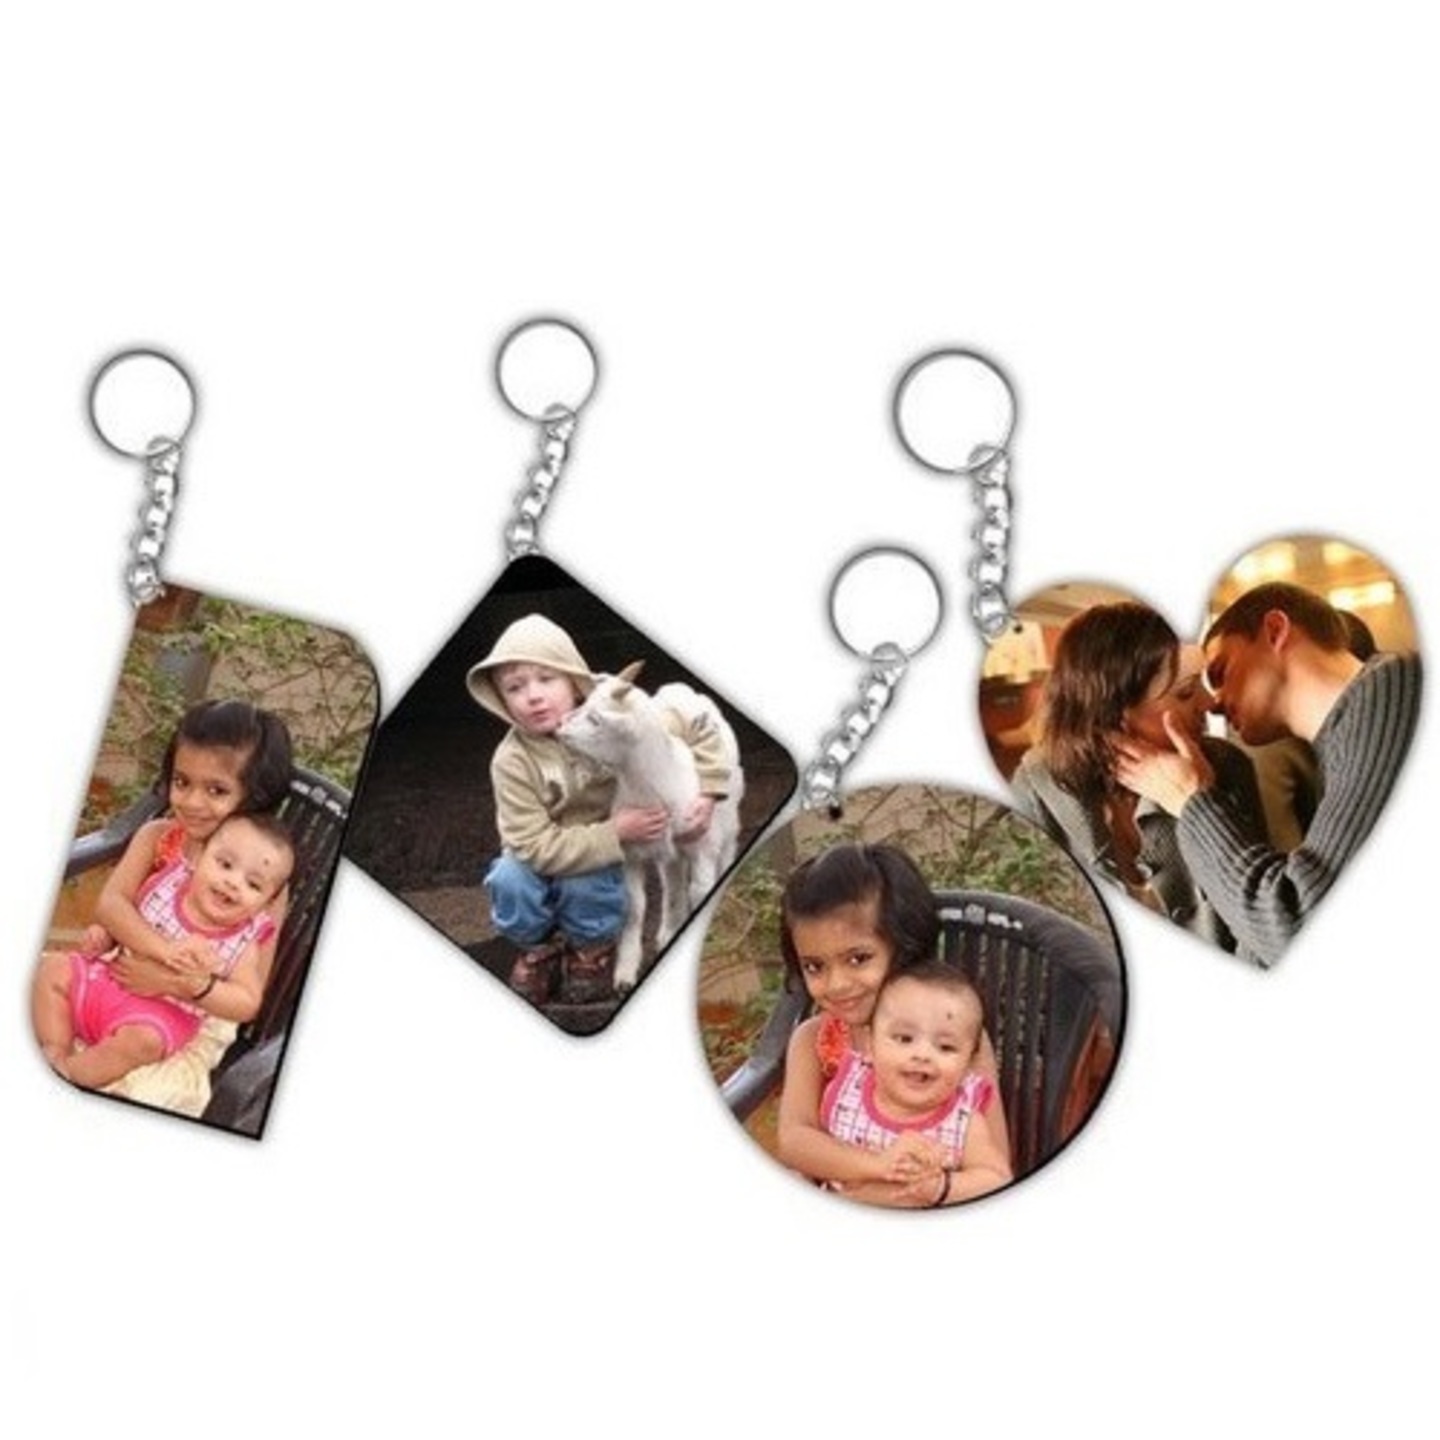 Customized keychain with your photo  message